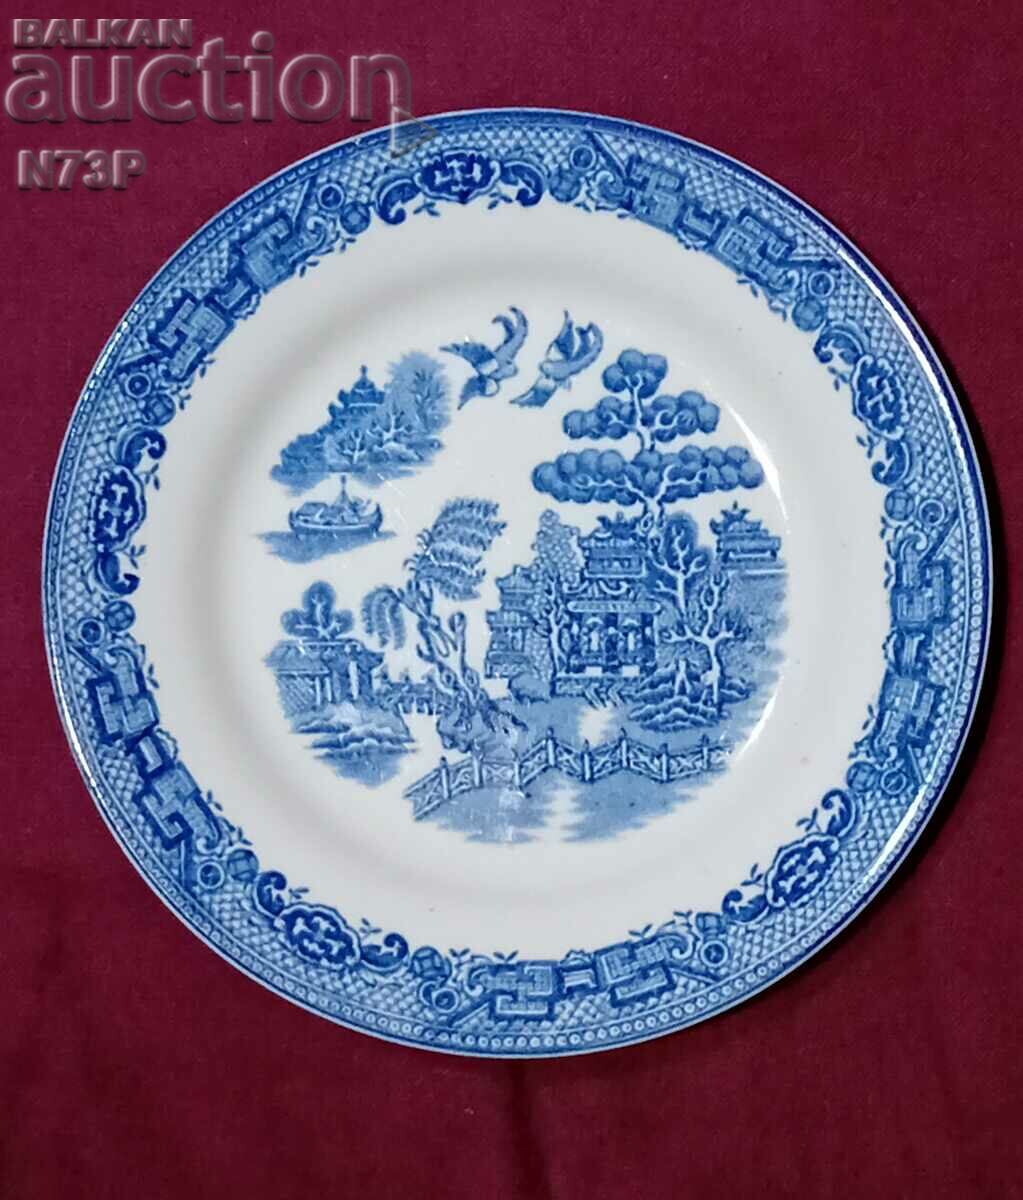 OLD PORCELAIN PLATE. MADE IN ENGLAND.